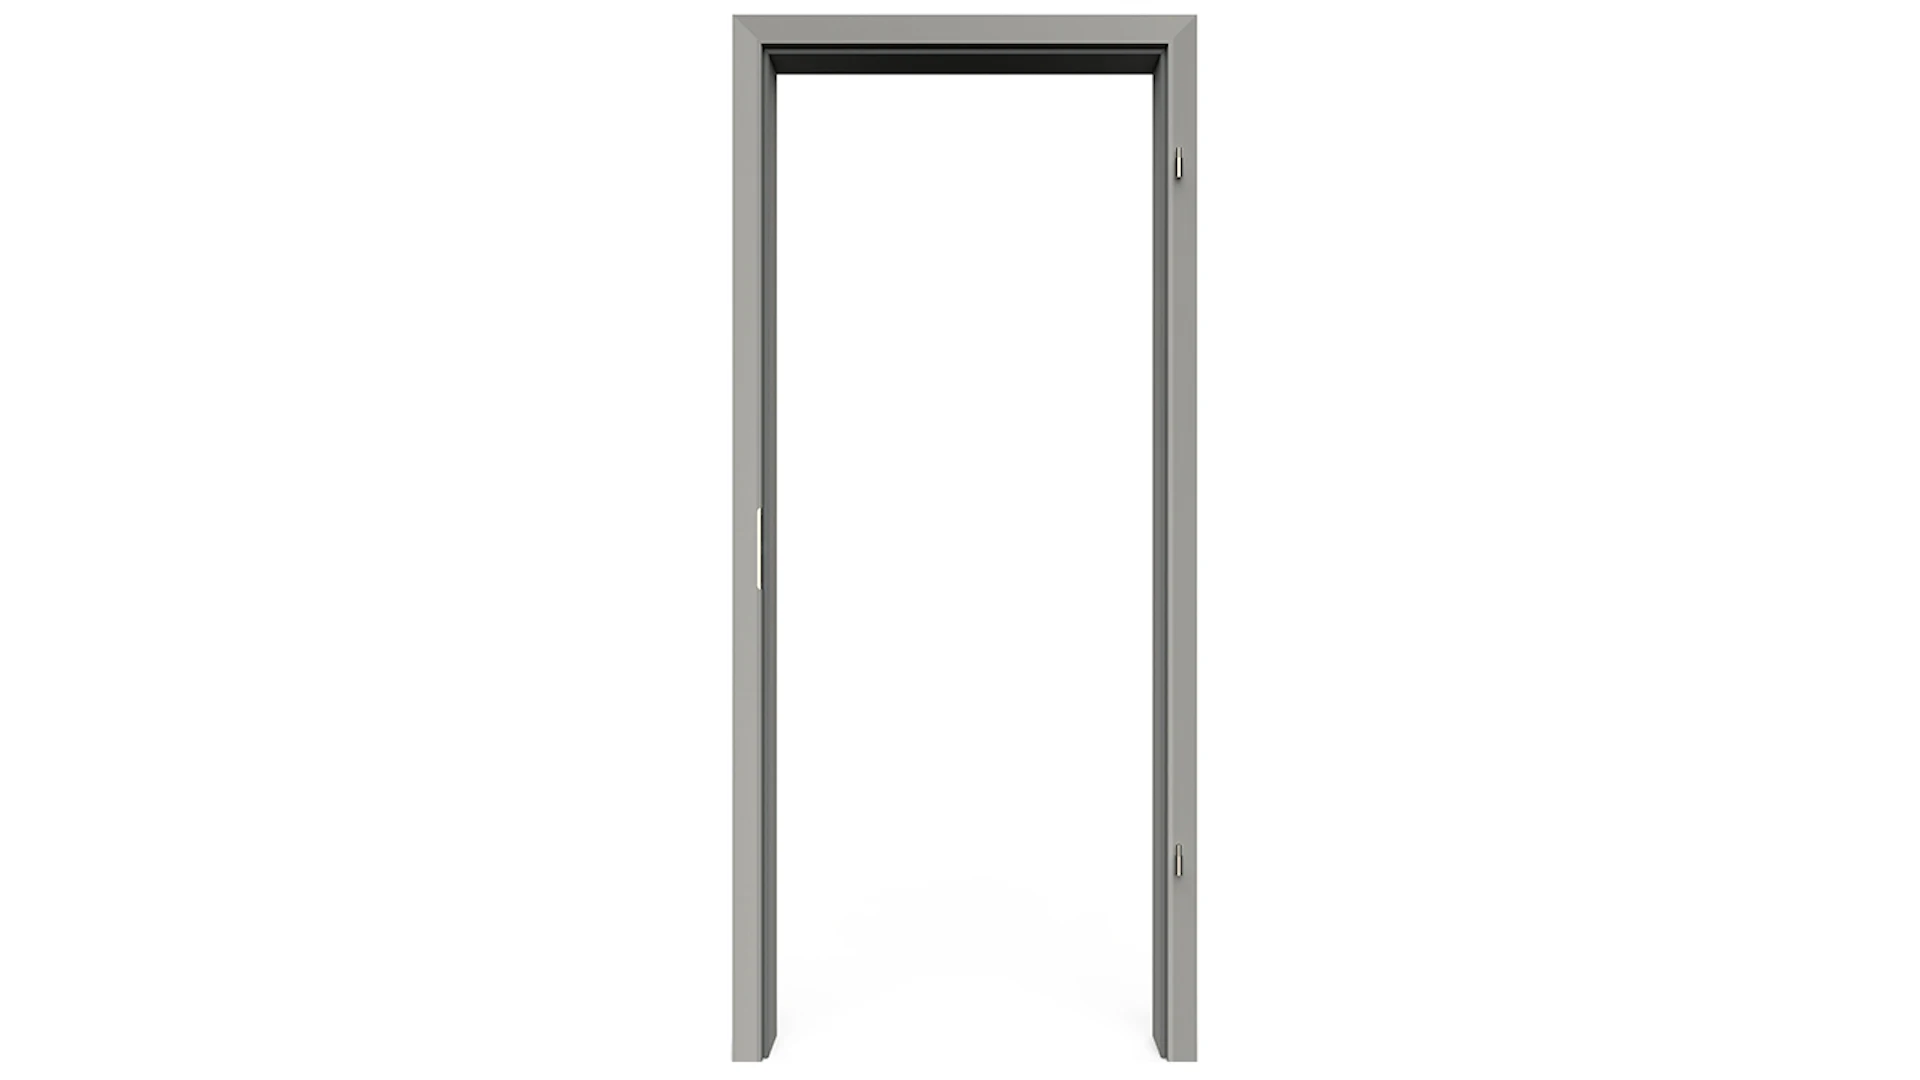 planeo Standard Door frame, rounded edge - CPL Silver grey - 1985 x 985 x 240 mm DIN Right